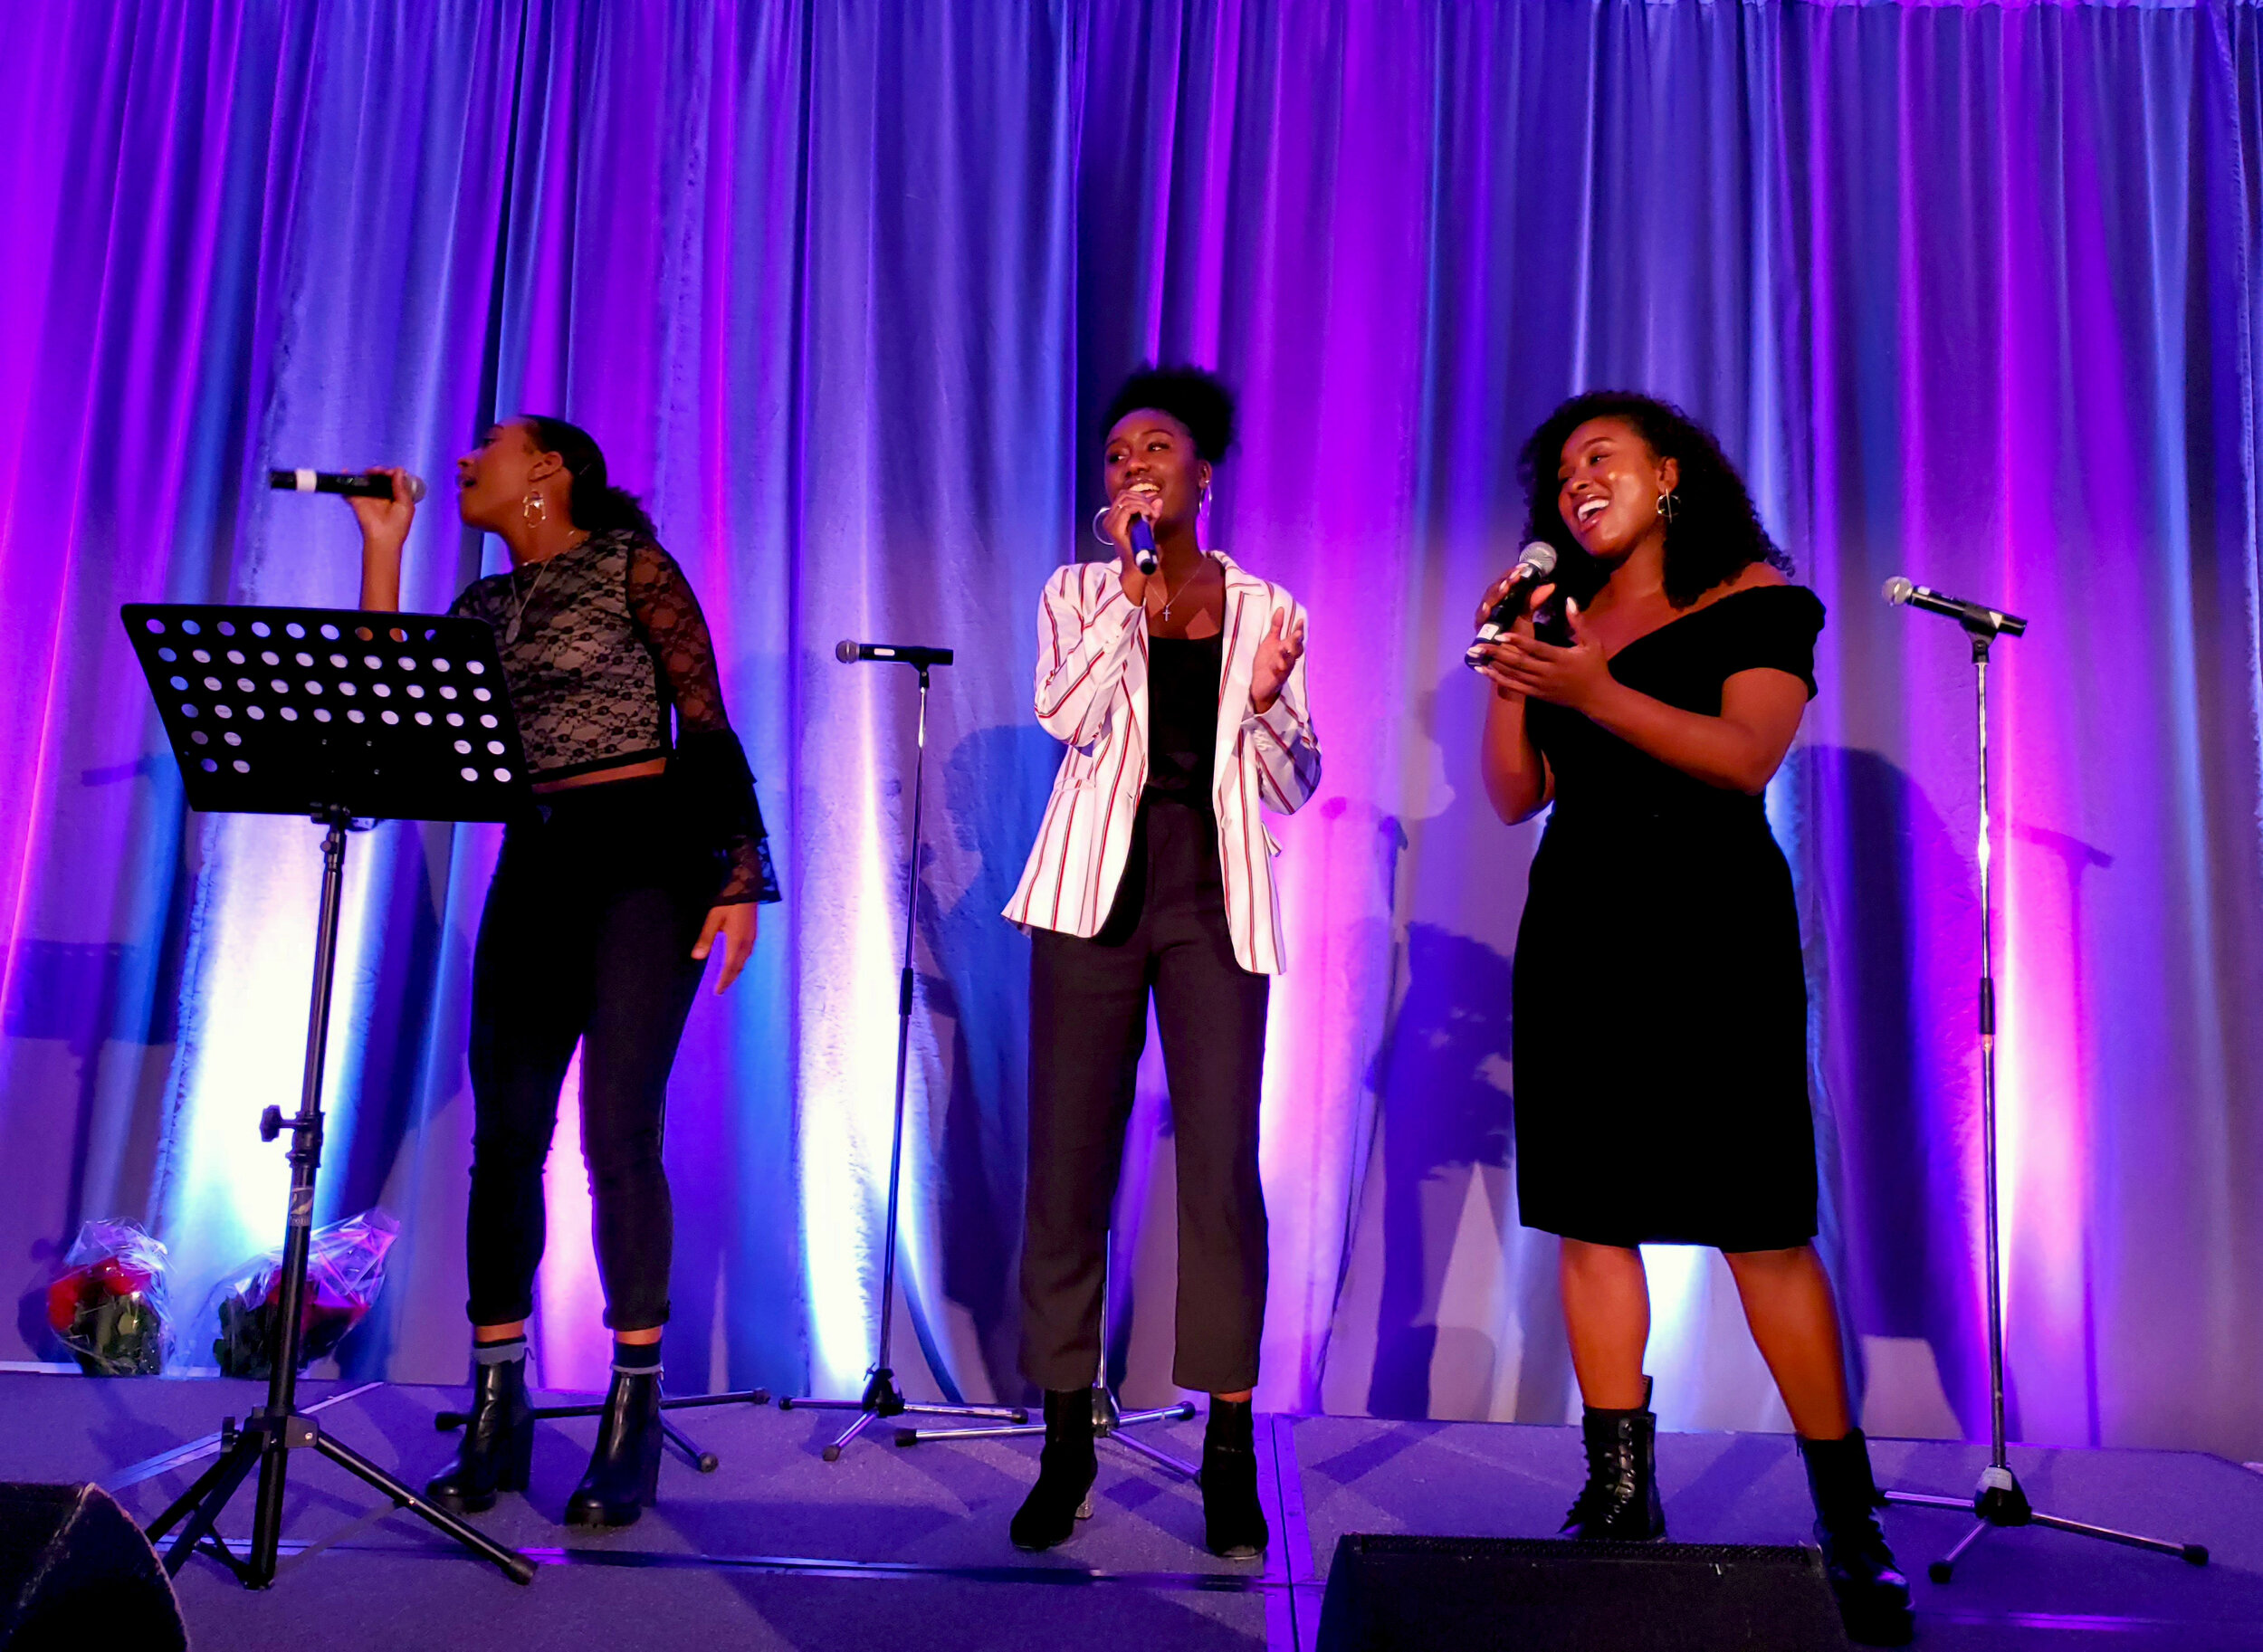 Young group singing 20191030_220402 - Copy.jpg